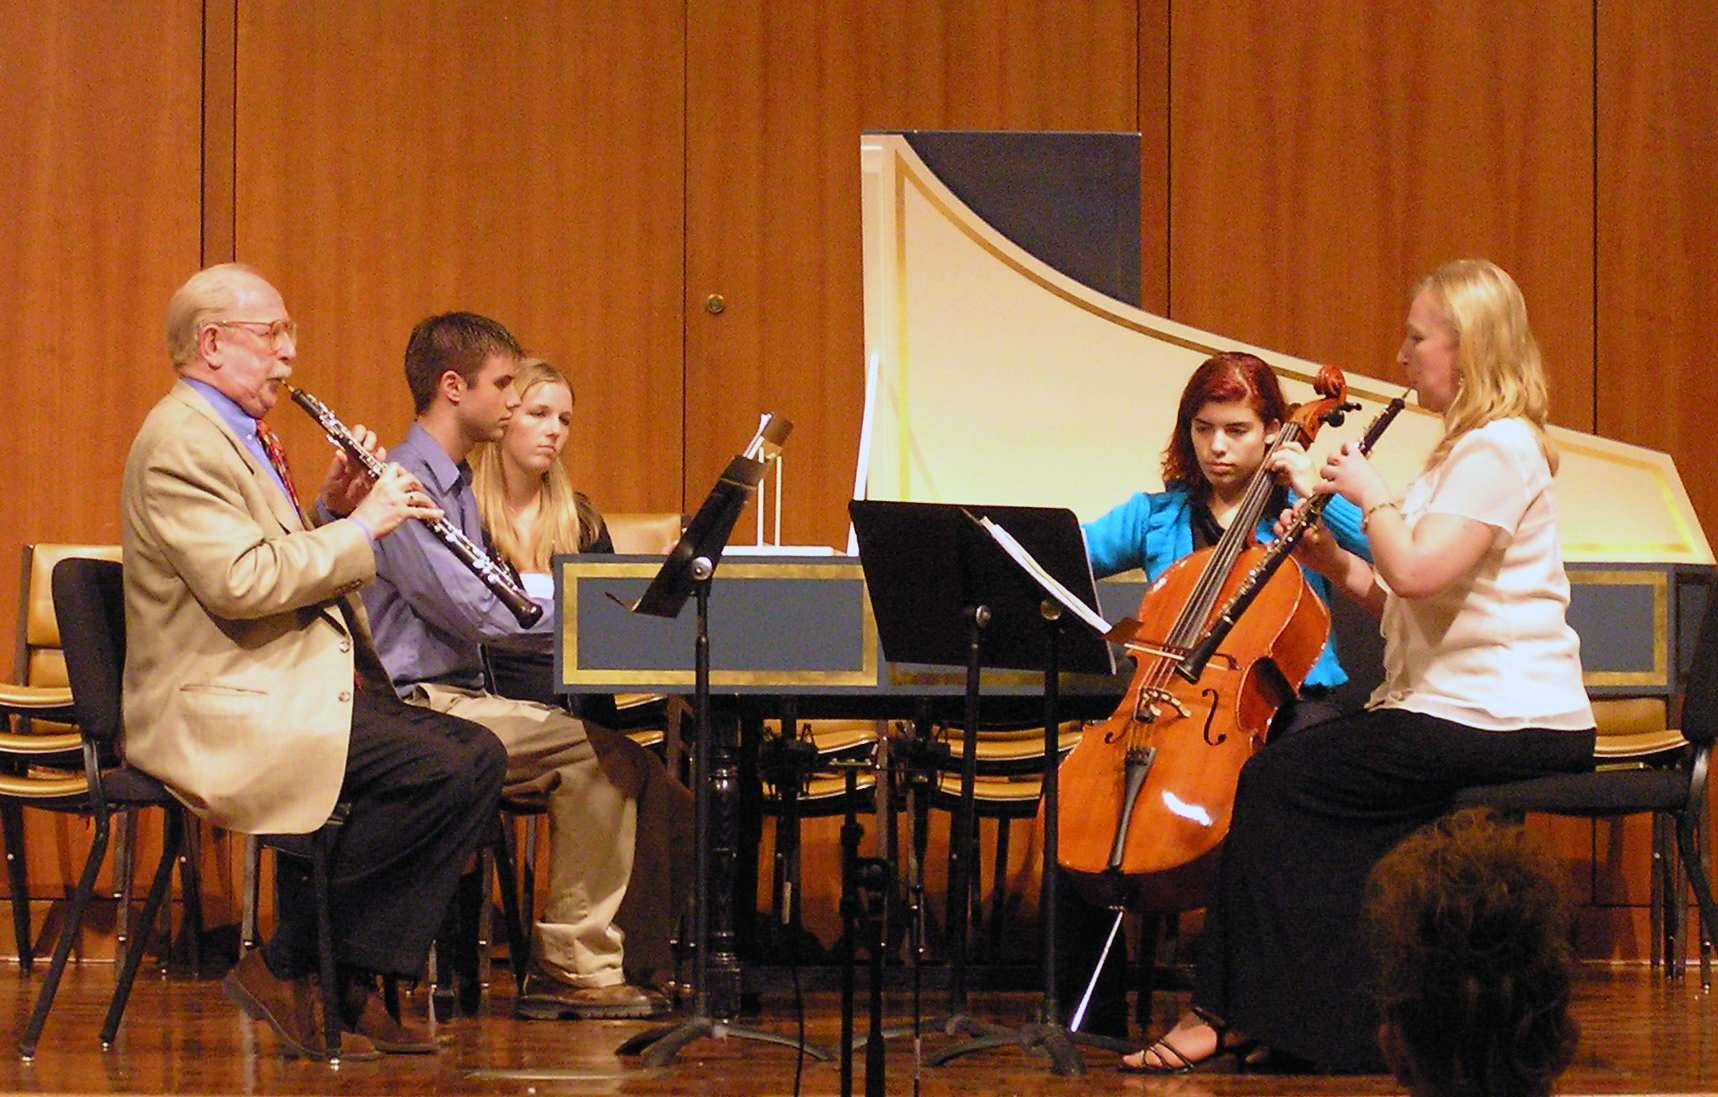 Musicians on the stage playing oboes, cello, and harpsichord.